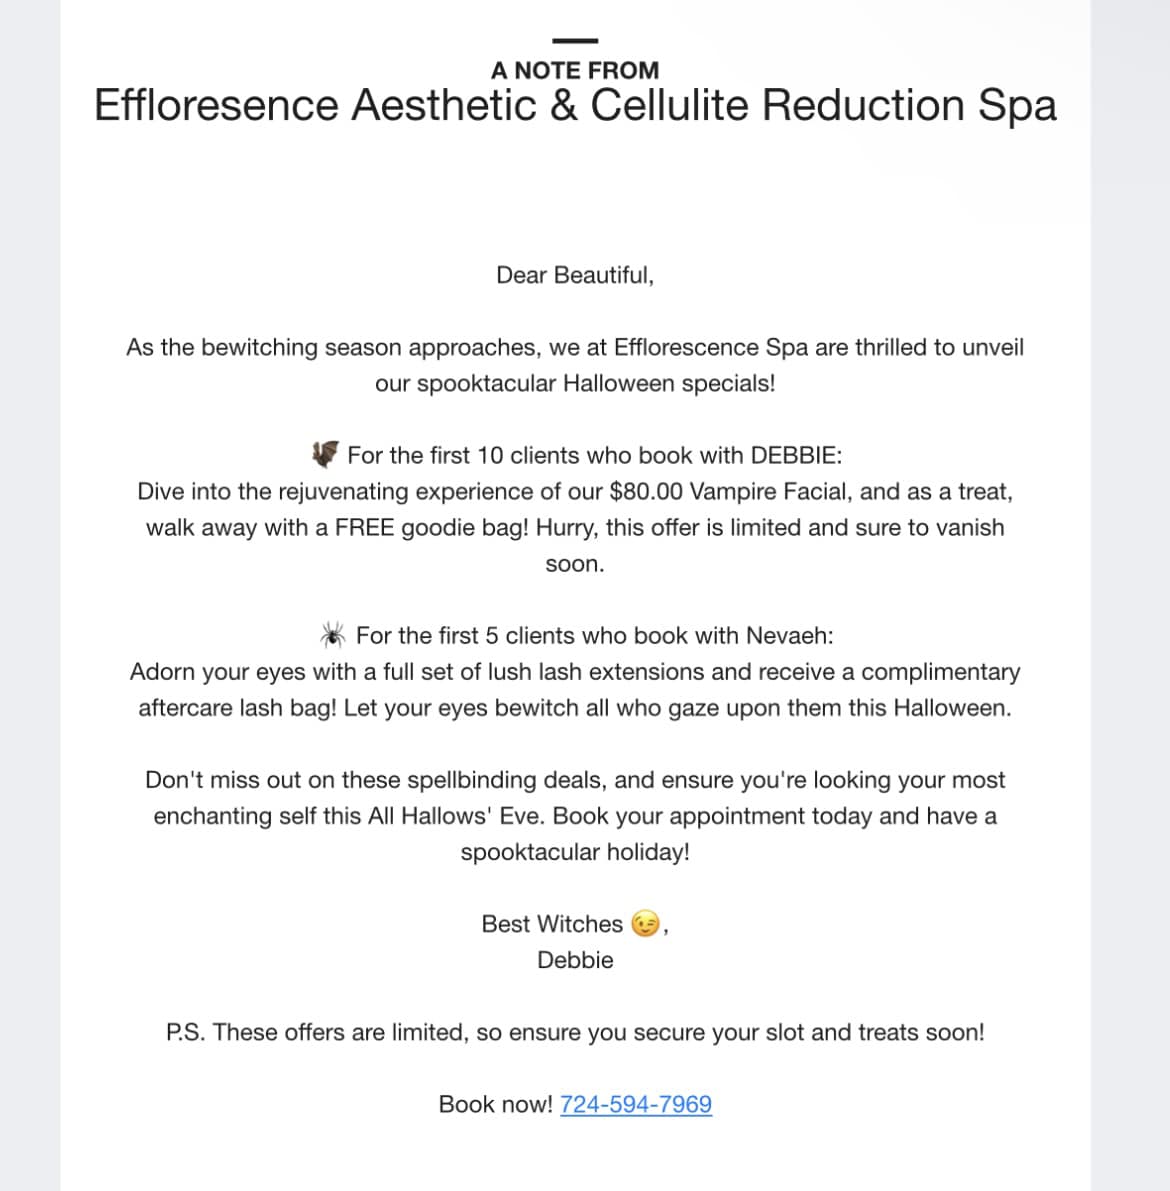 Efflorescence Aesthetic and Cellulite Reduction Spa 333 Allegheny Ave # 200, Oakmont Pennsylvania 15139